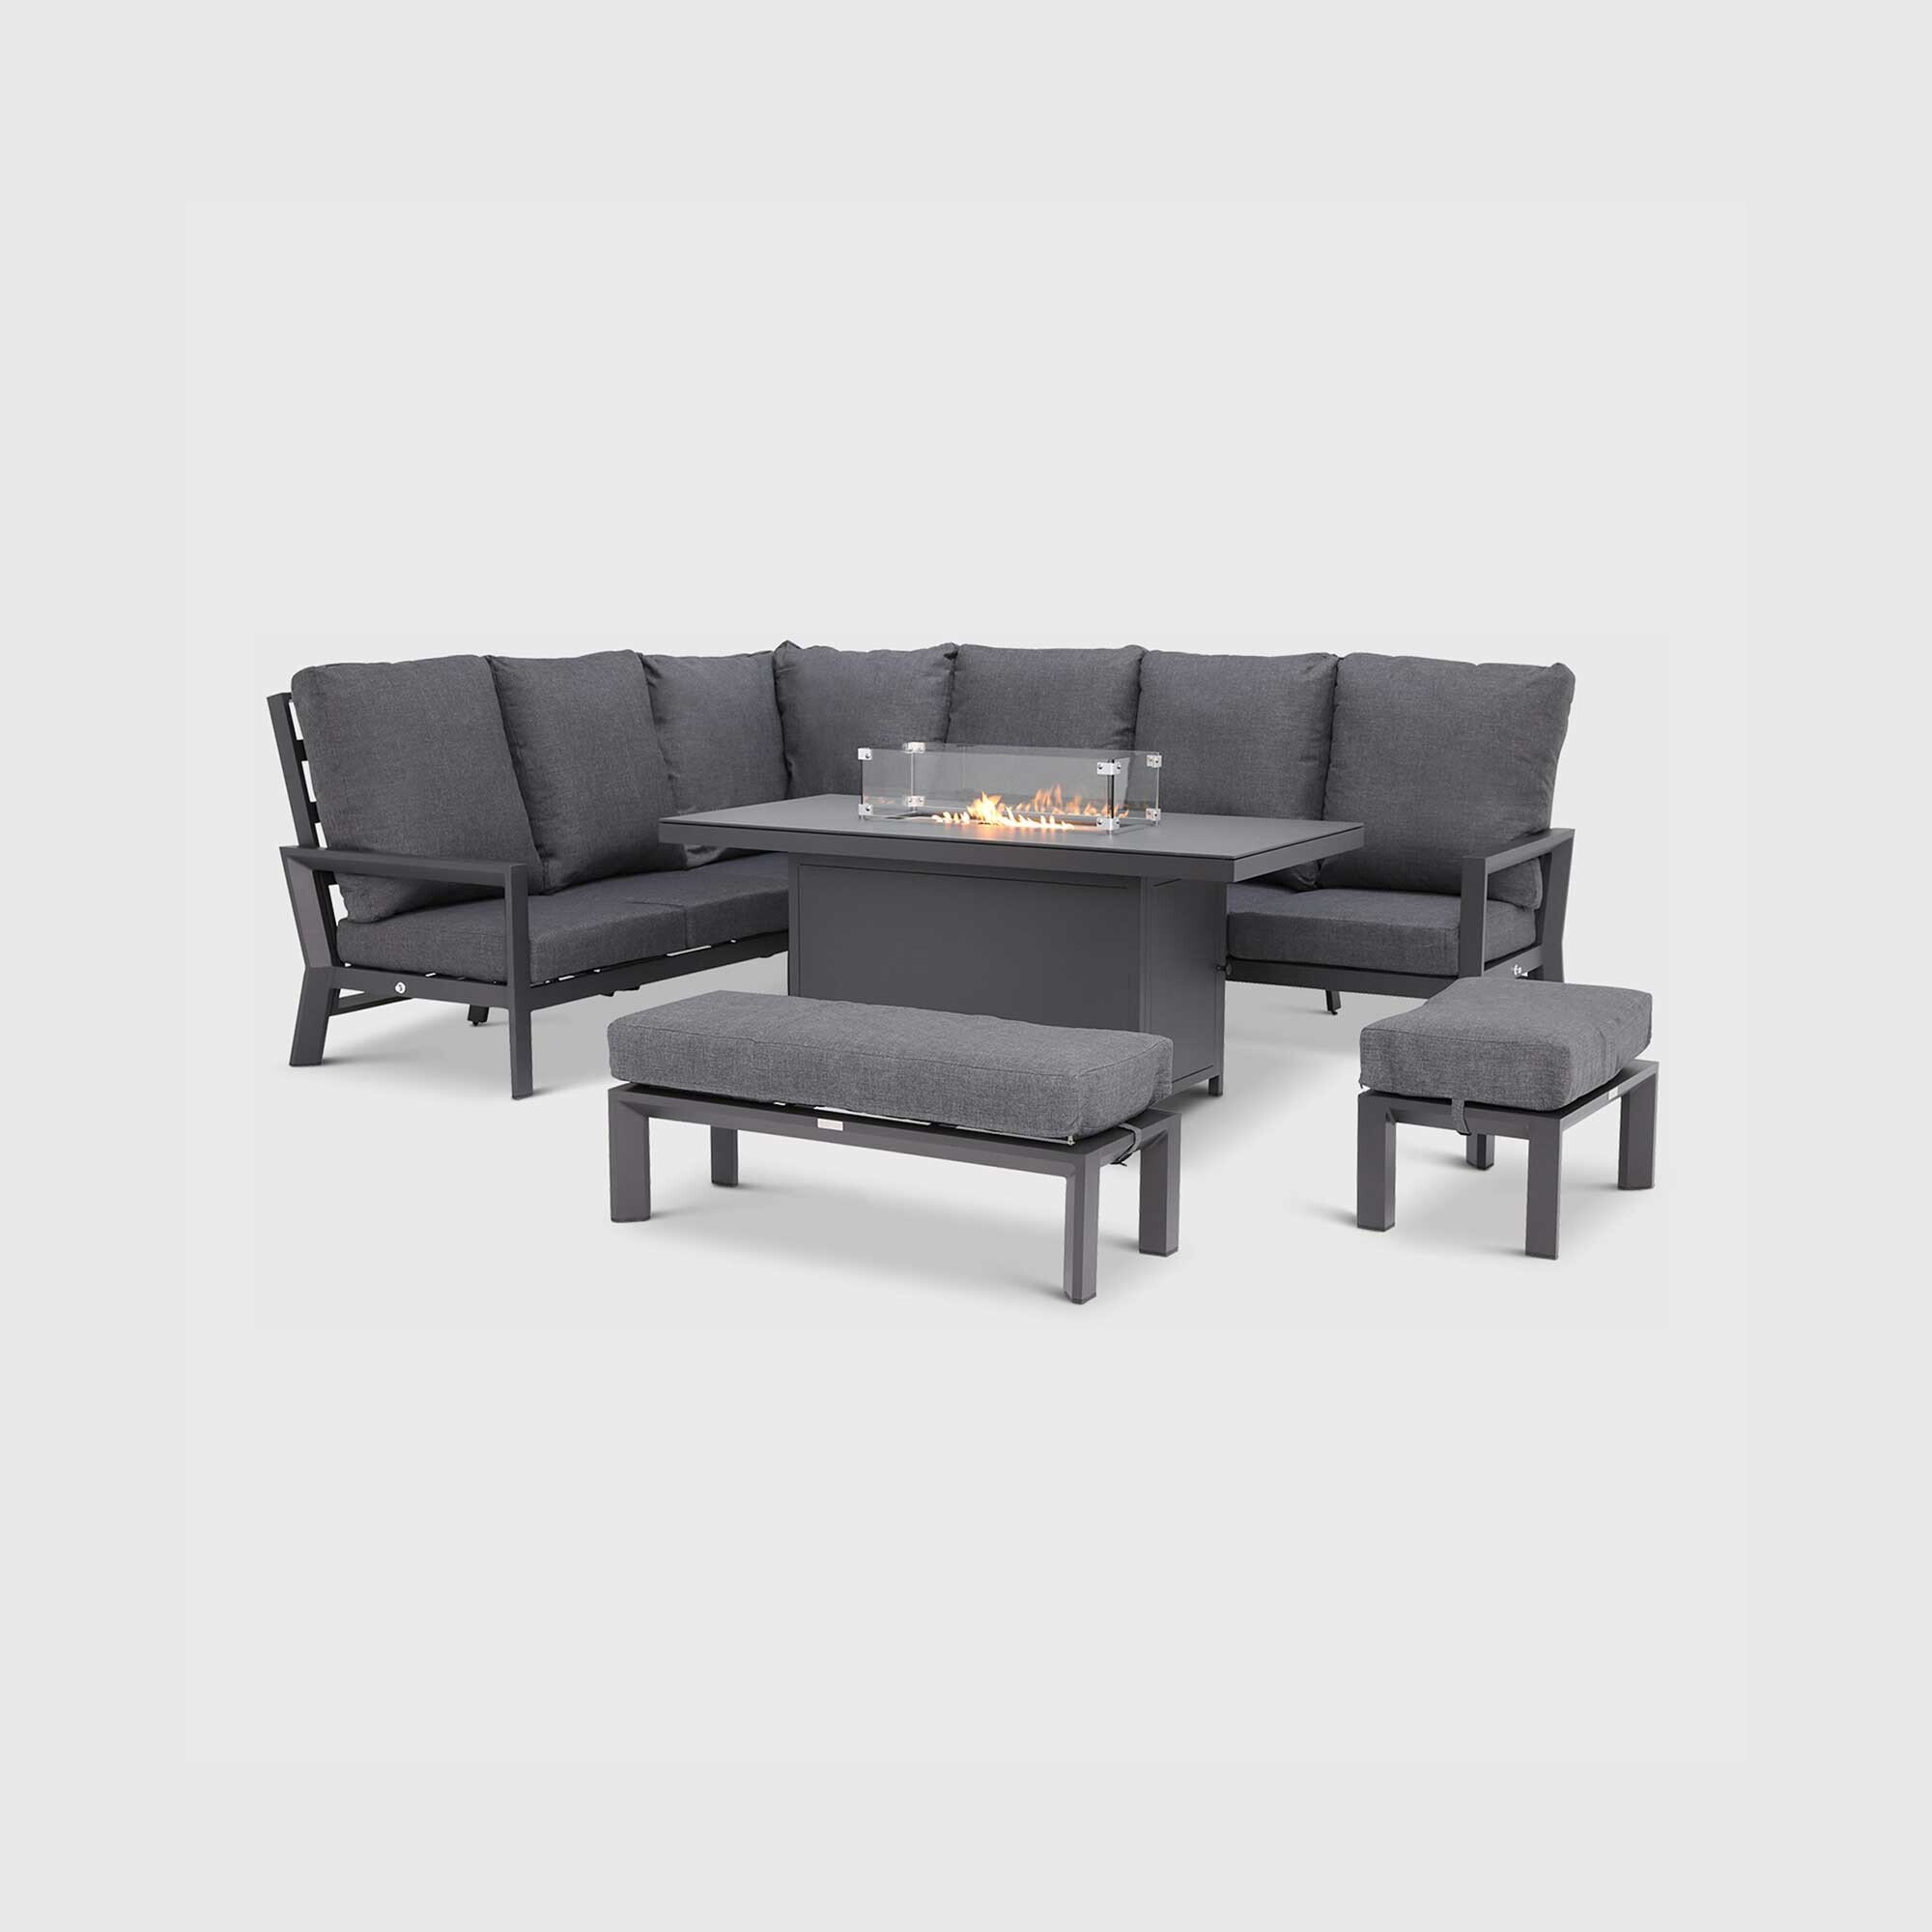 Maine Reclining Corner Dining Set With Fire Pit, Grey | Barker & Stonehouse